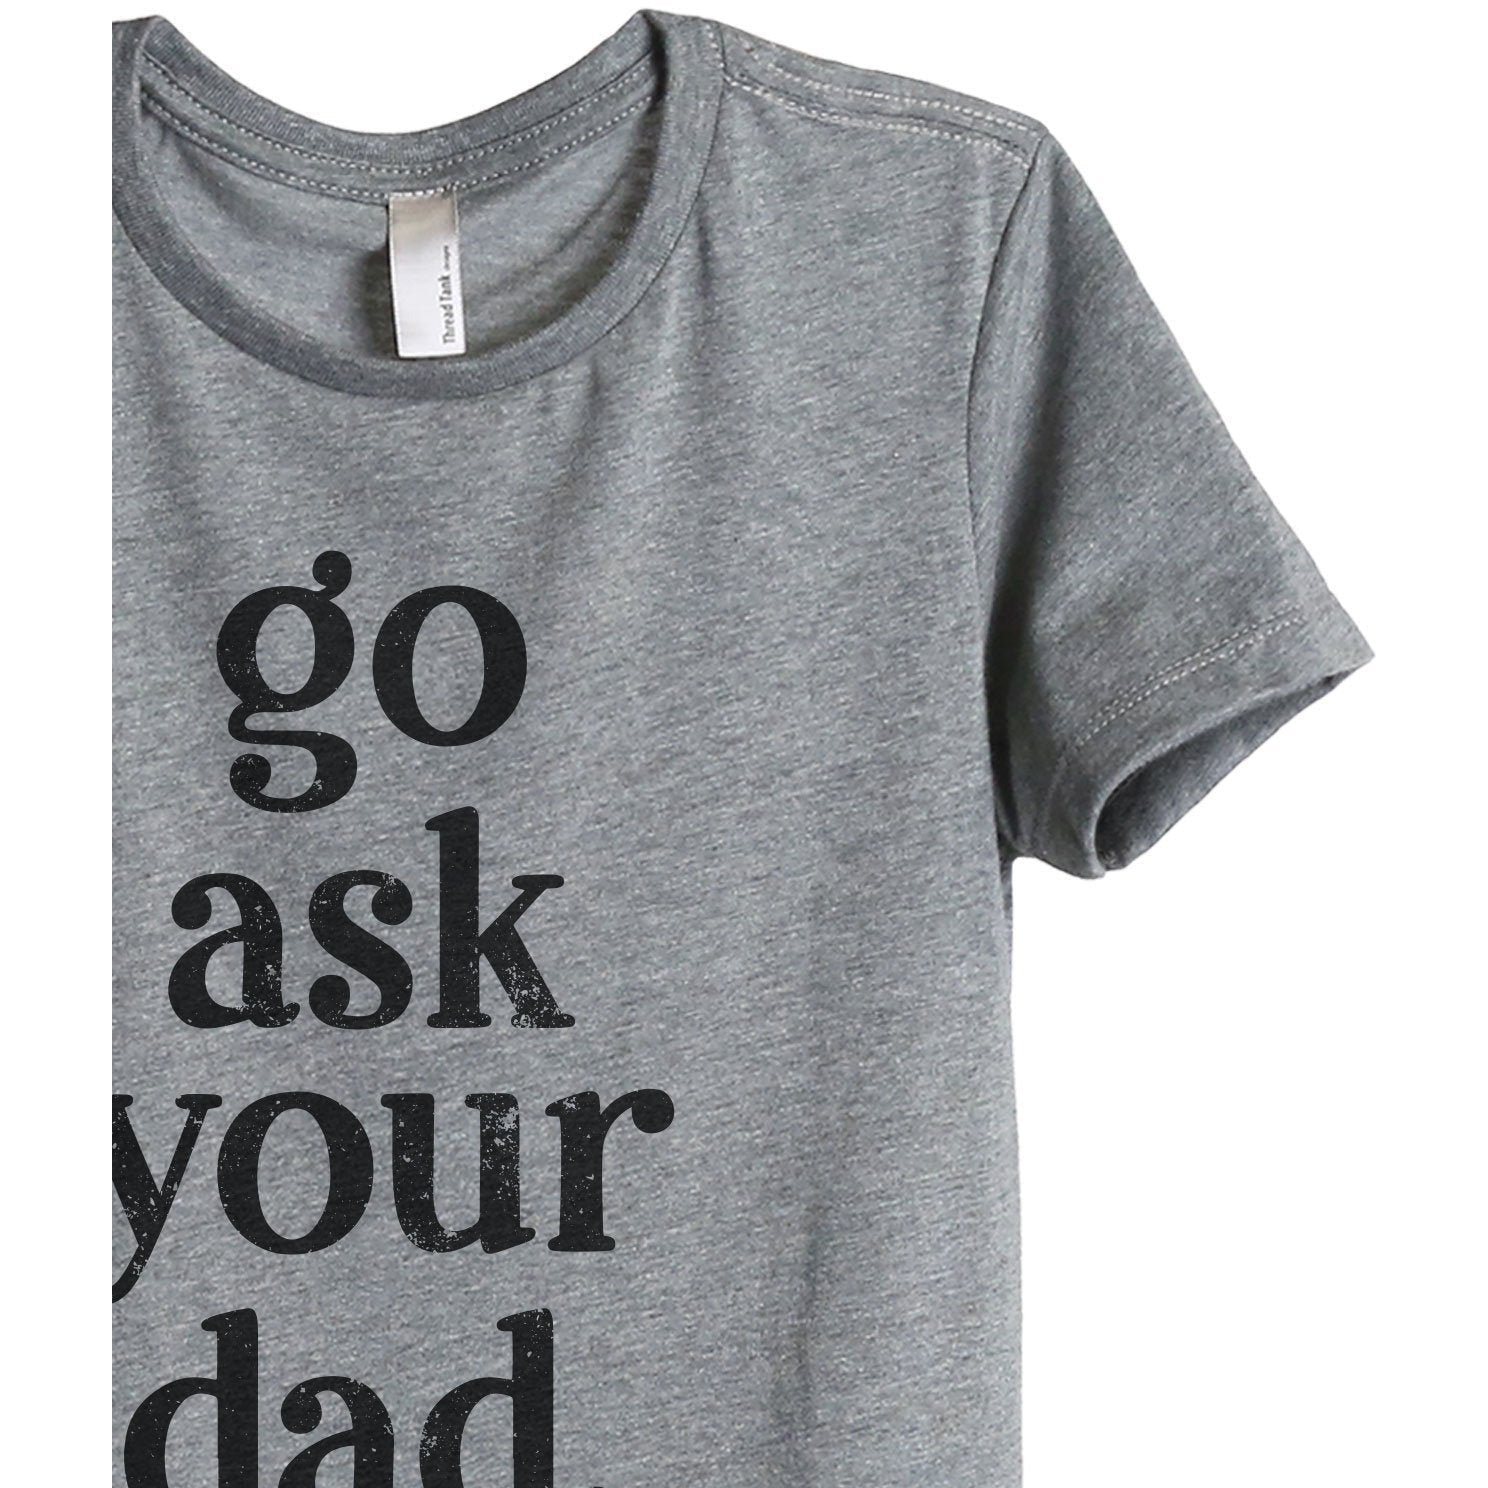 Go Ask Your Dad Women's Relaxed Crewneck T-Shirt Top Tee Heather Grey Zoom Details
